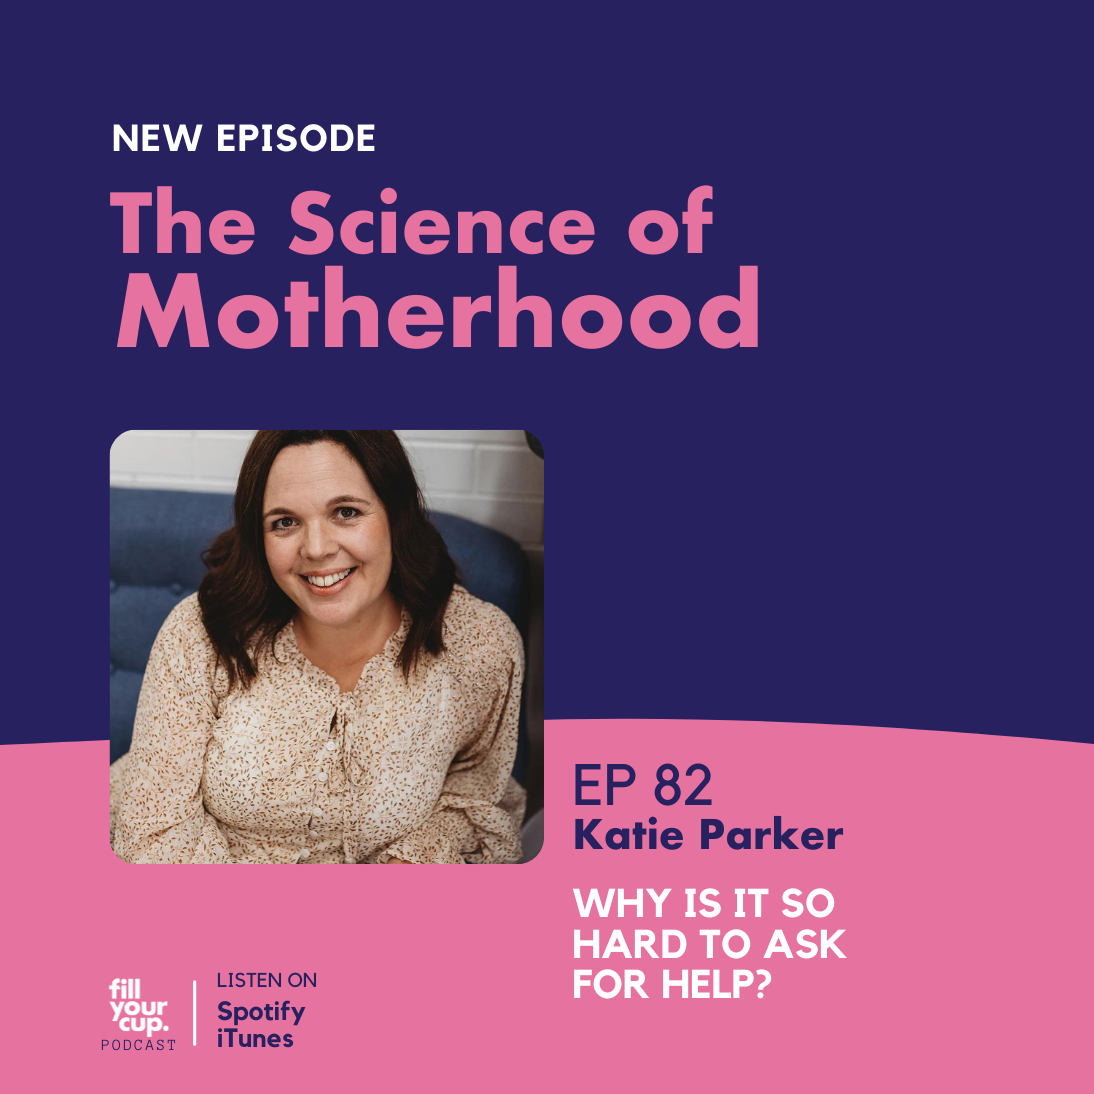 Ep 82. Katie Parker - Why is it so hard to ask for help?